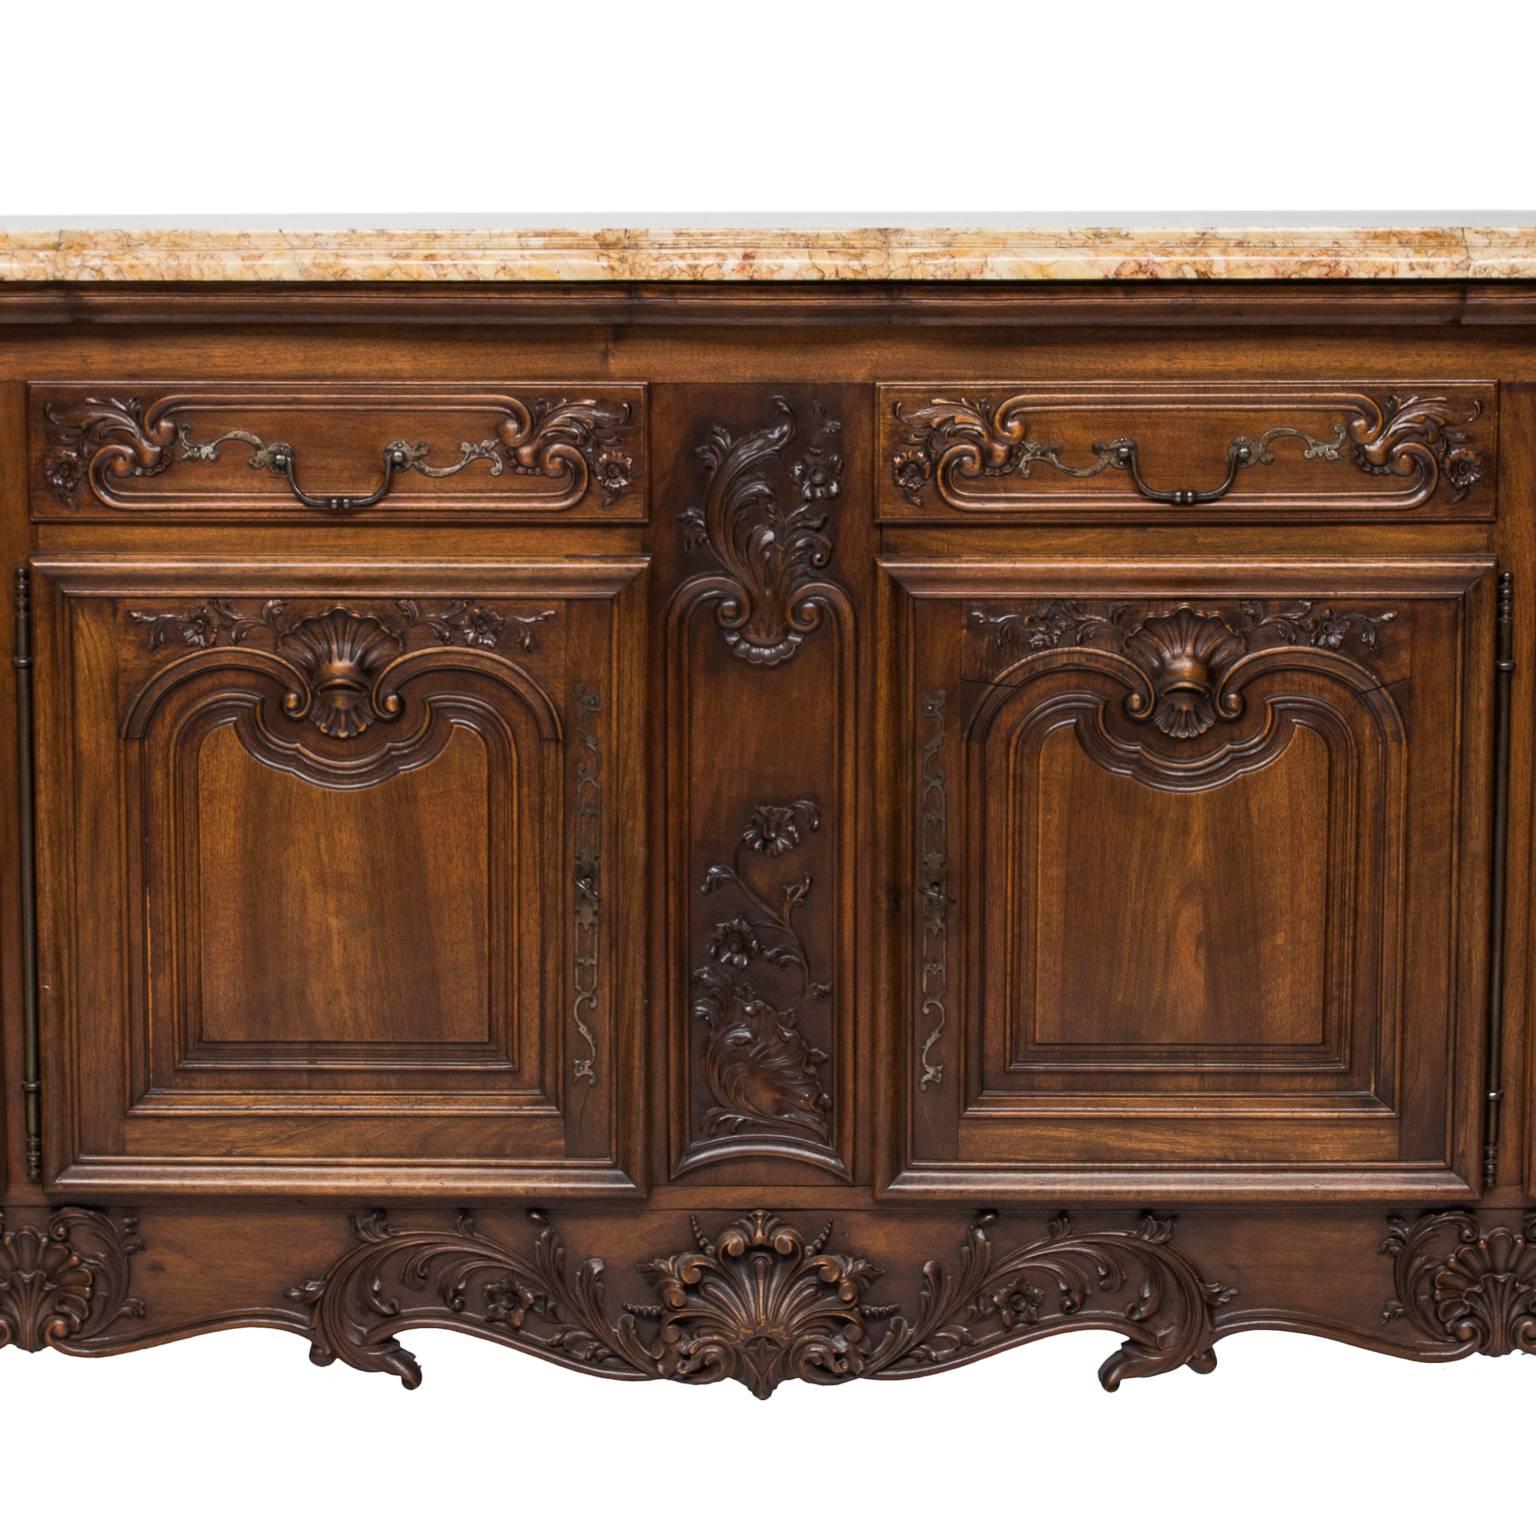 A striking and import Louis XV marble top enfilade from the city of Lyon. Lyonnaise furniture is considered by some to be the best craftsmanship from France. This piece is an example of the inherent qualities. Beautiful walnut, a choice stock.